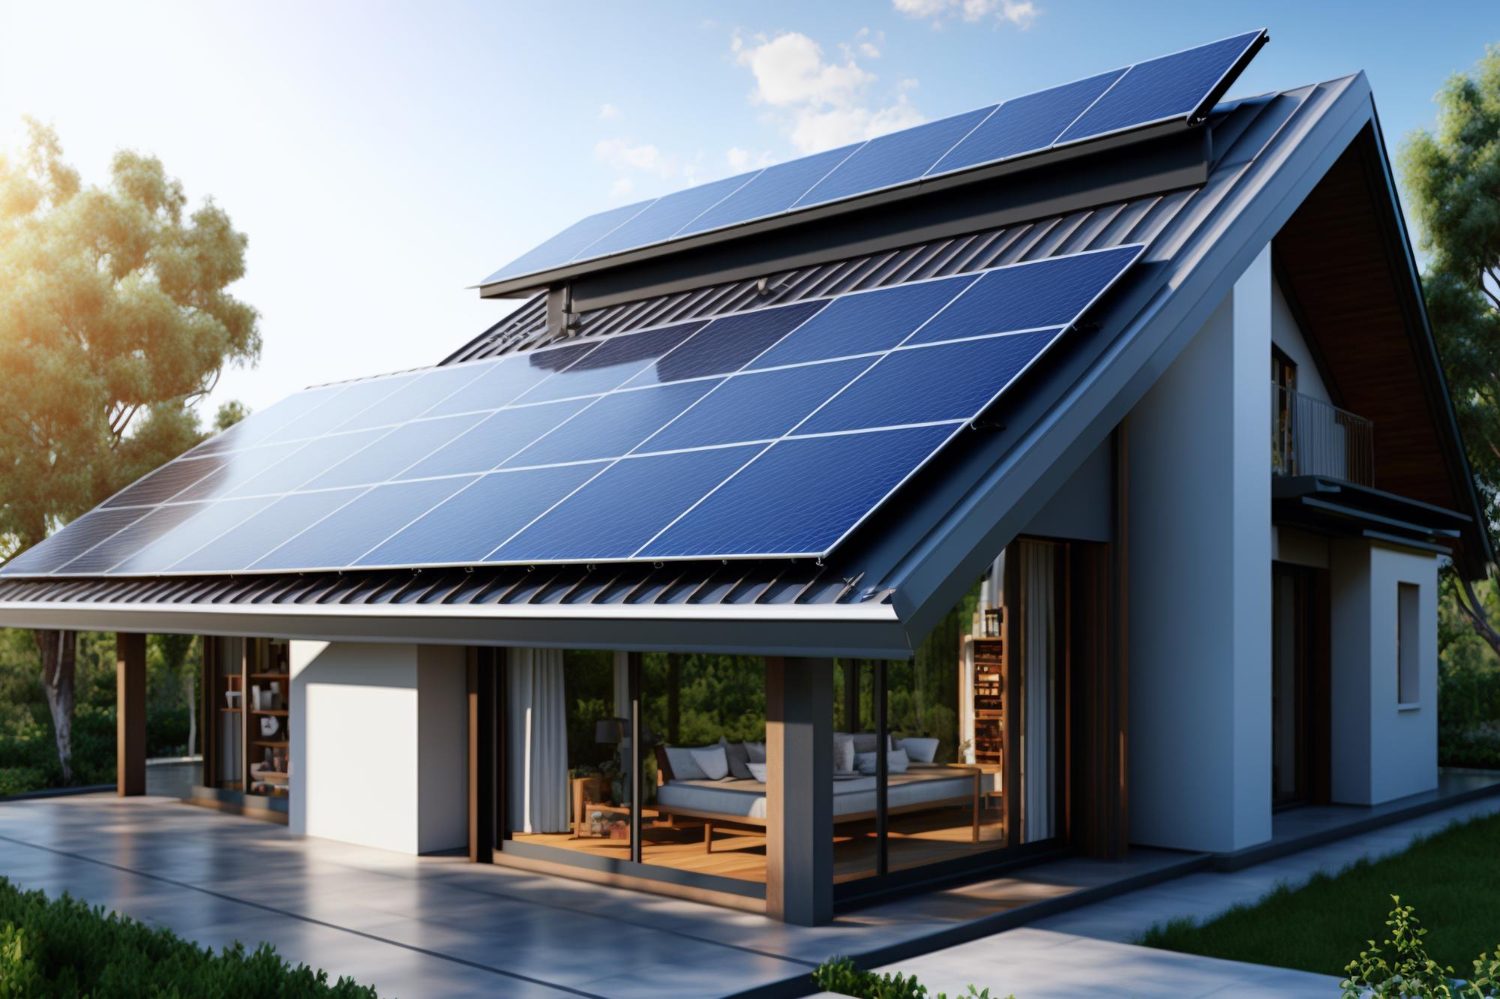 a house with solar panels on the roof